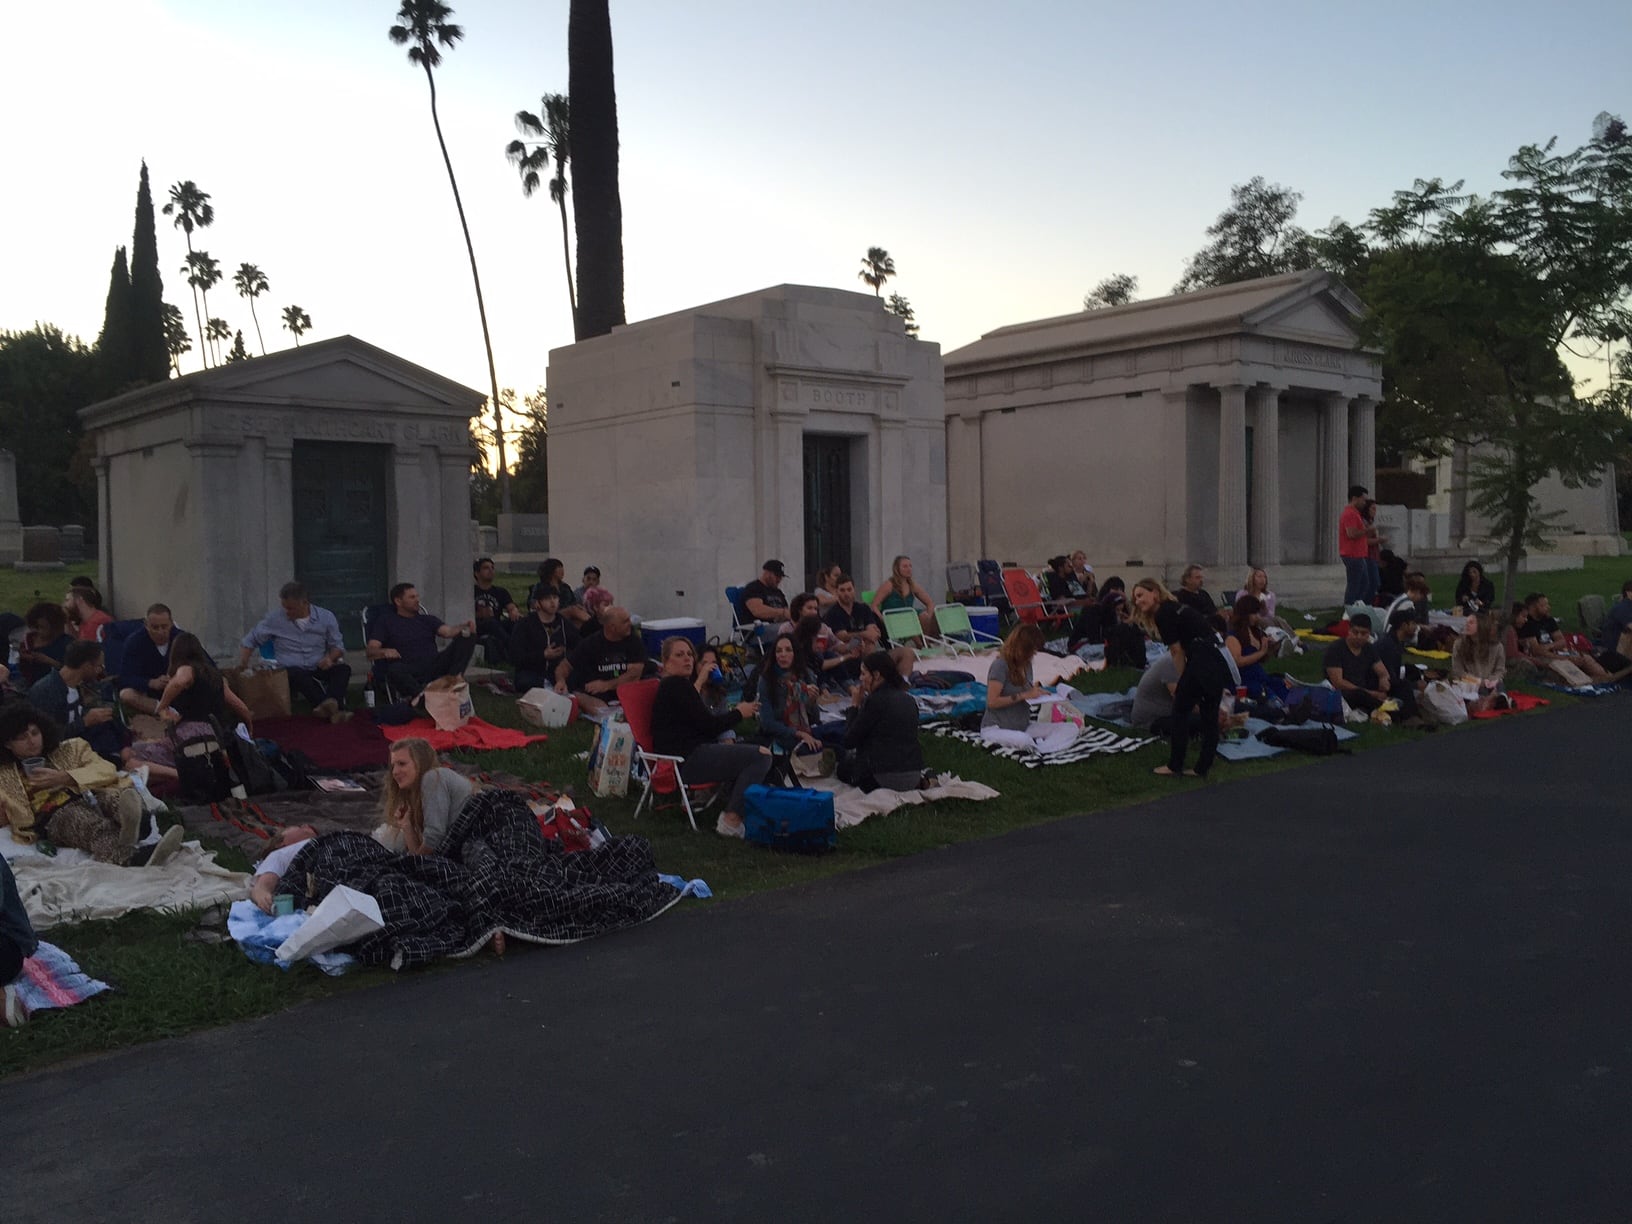 37 Best Pictures Hollywood Forever Movies Tips / Guide To La S Cemeteries Getting To Know The Ghosts Of Hollywood Past Thrillist